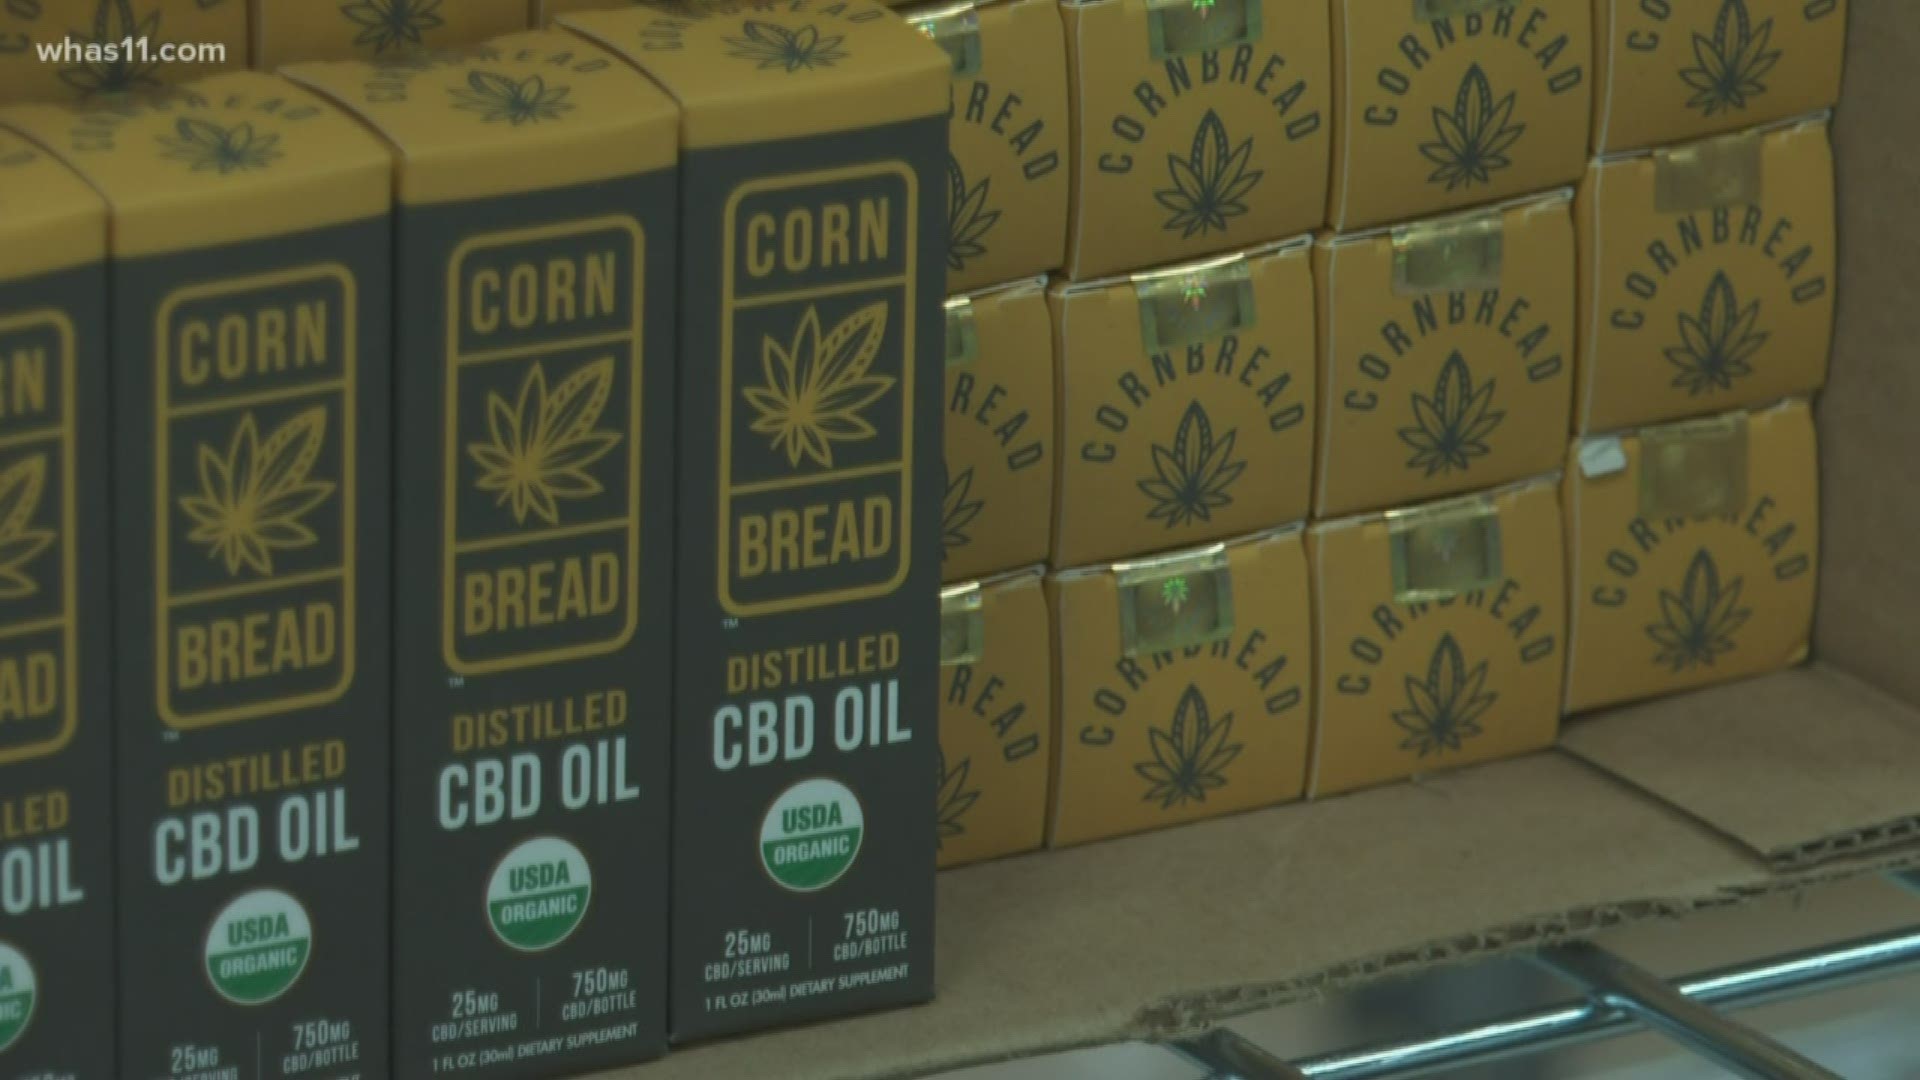 A Kentucky CBD company is the first in the state to have its products earn a special federal certification.